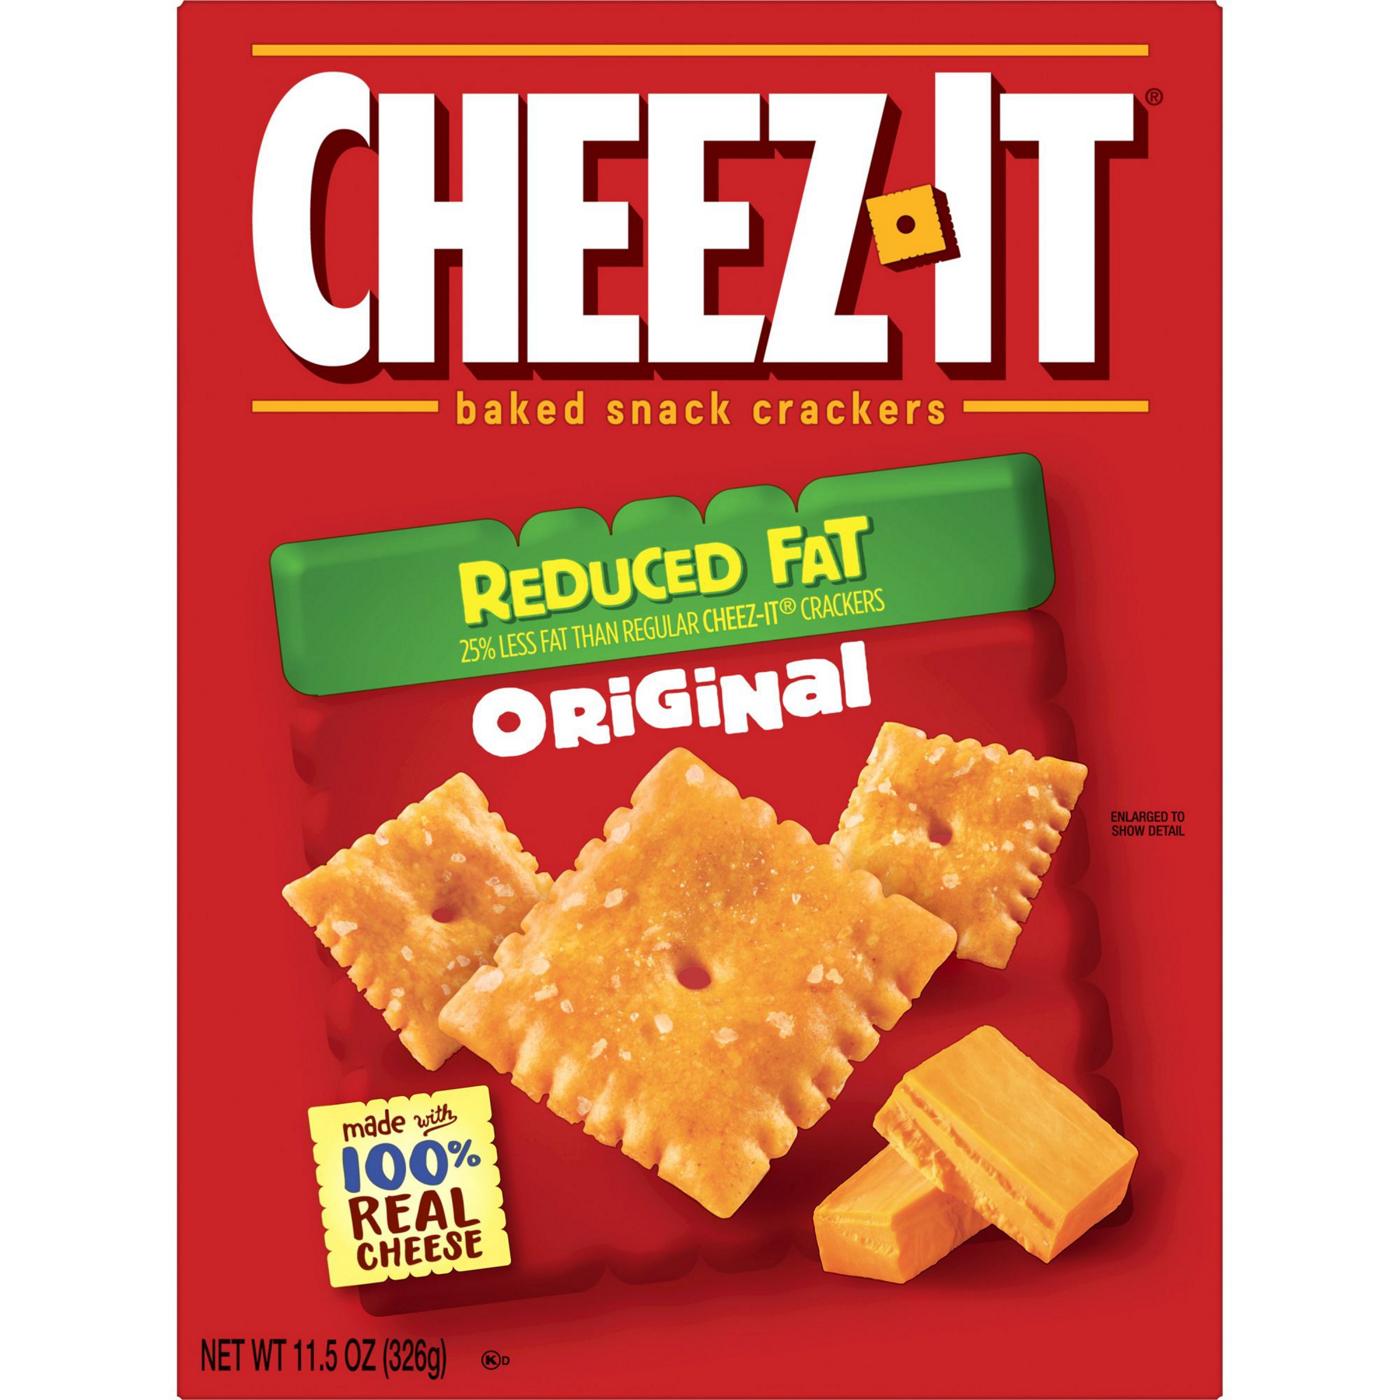 Cheez-It Reduced Fat Original Baked Snack Cheese Crackers; image 1 of 6